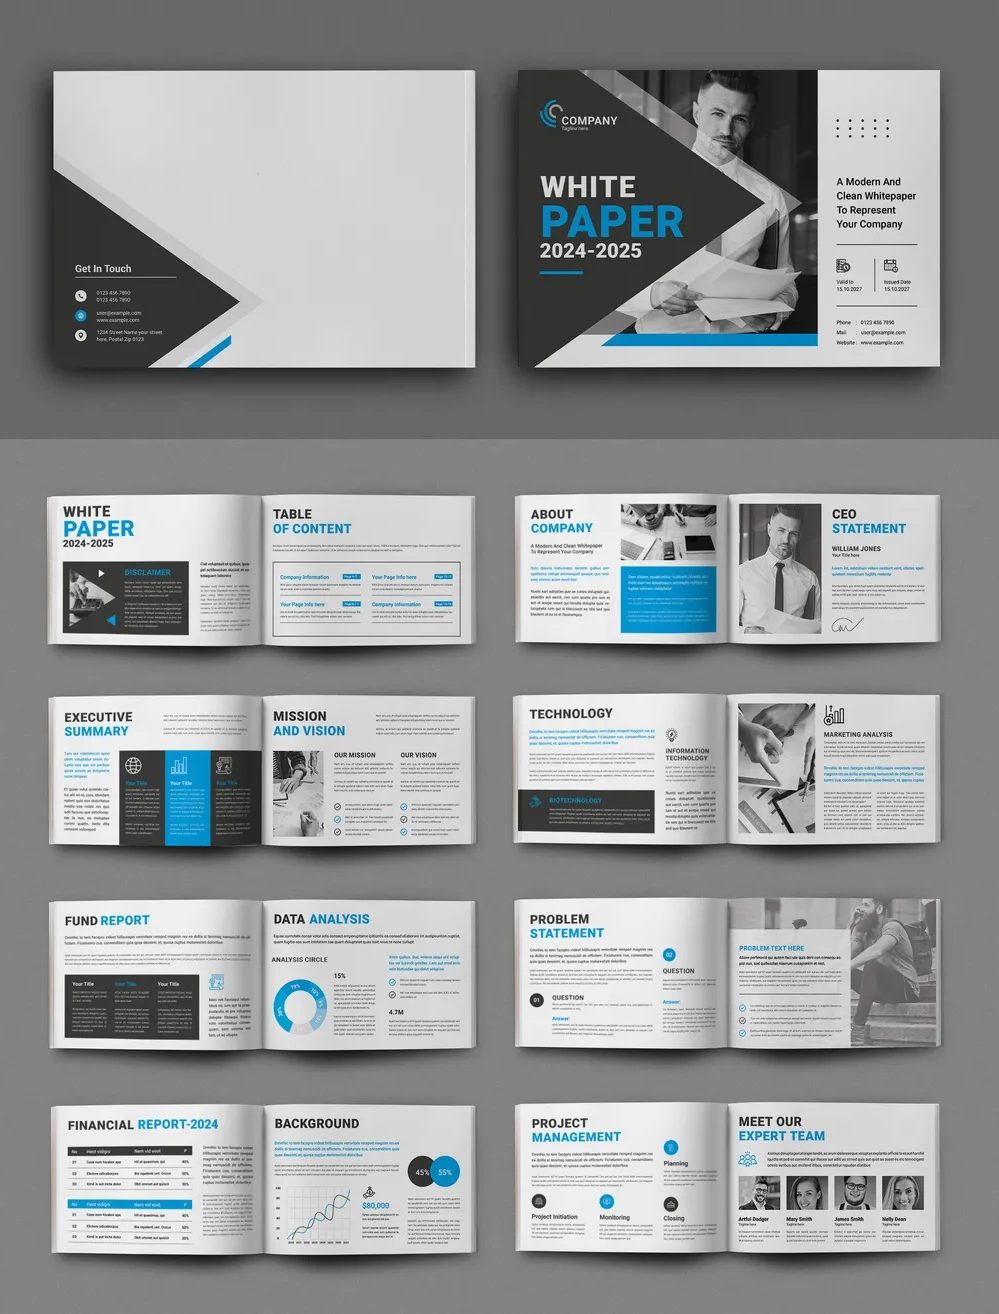 Adobestock - White Paper Template Layout 718545795